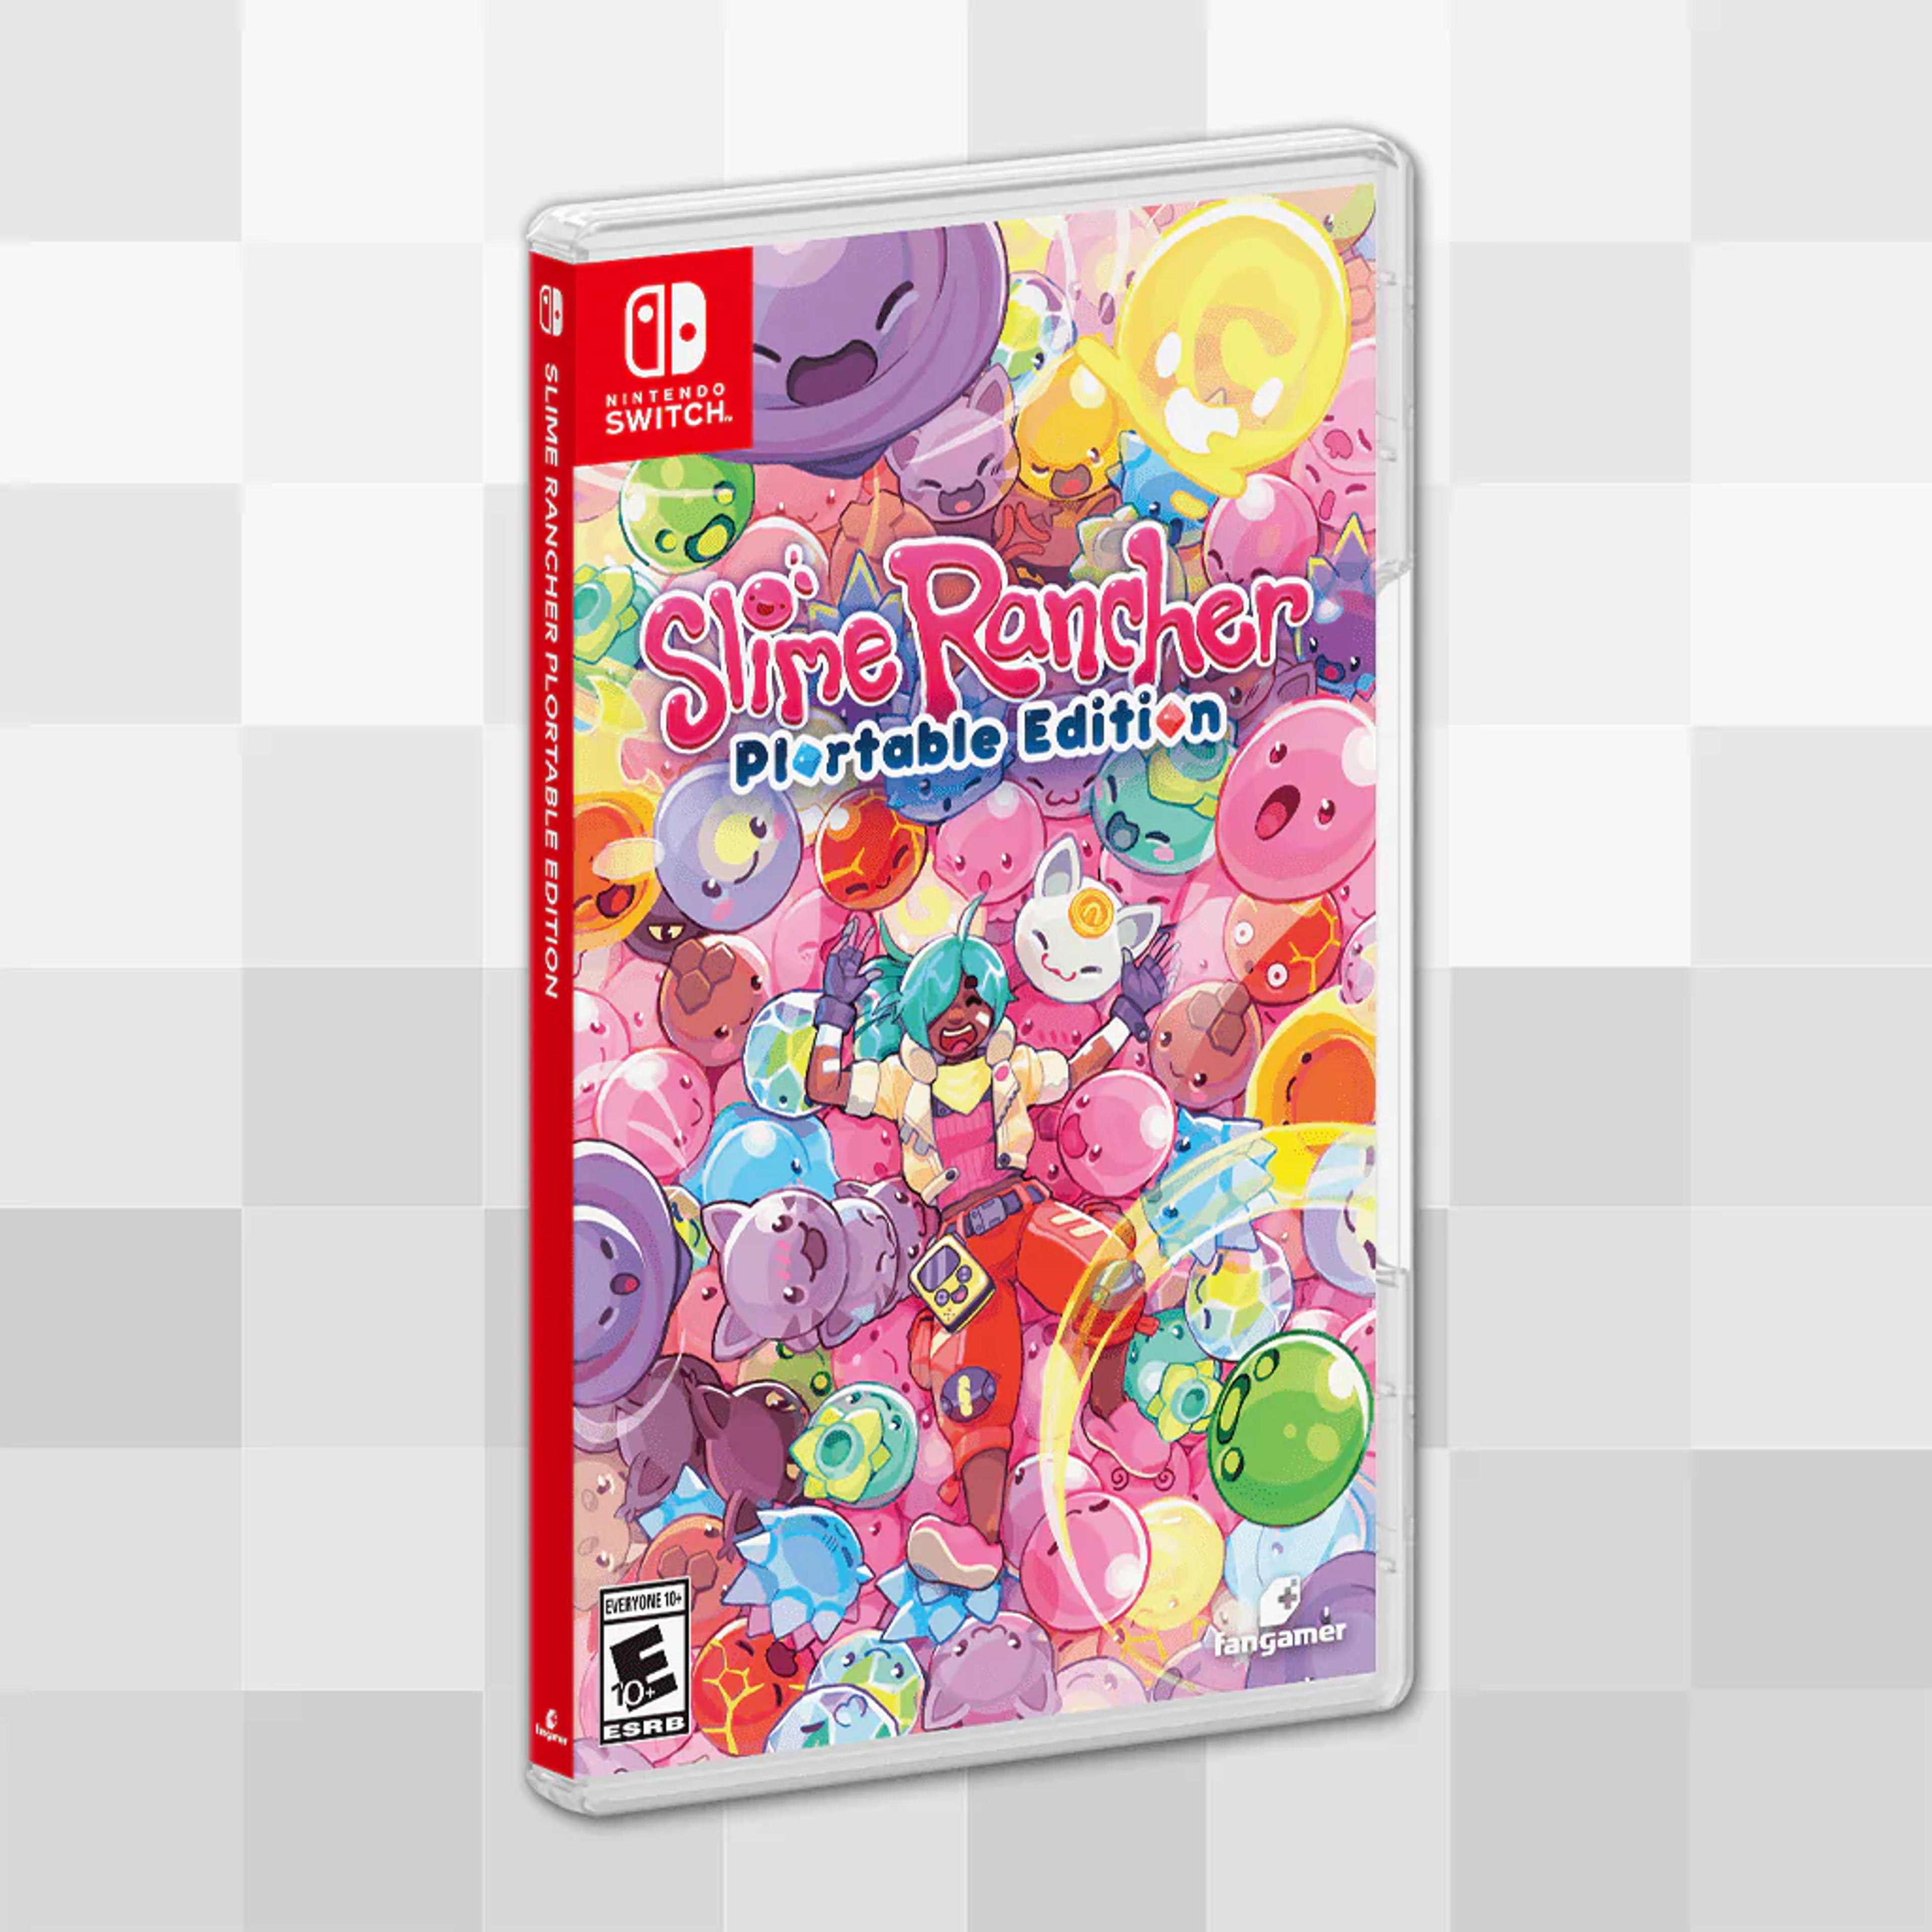 Slime Rancher Plortable Edition for Nintendo Switch™